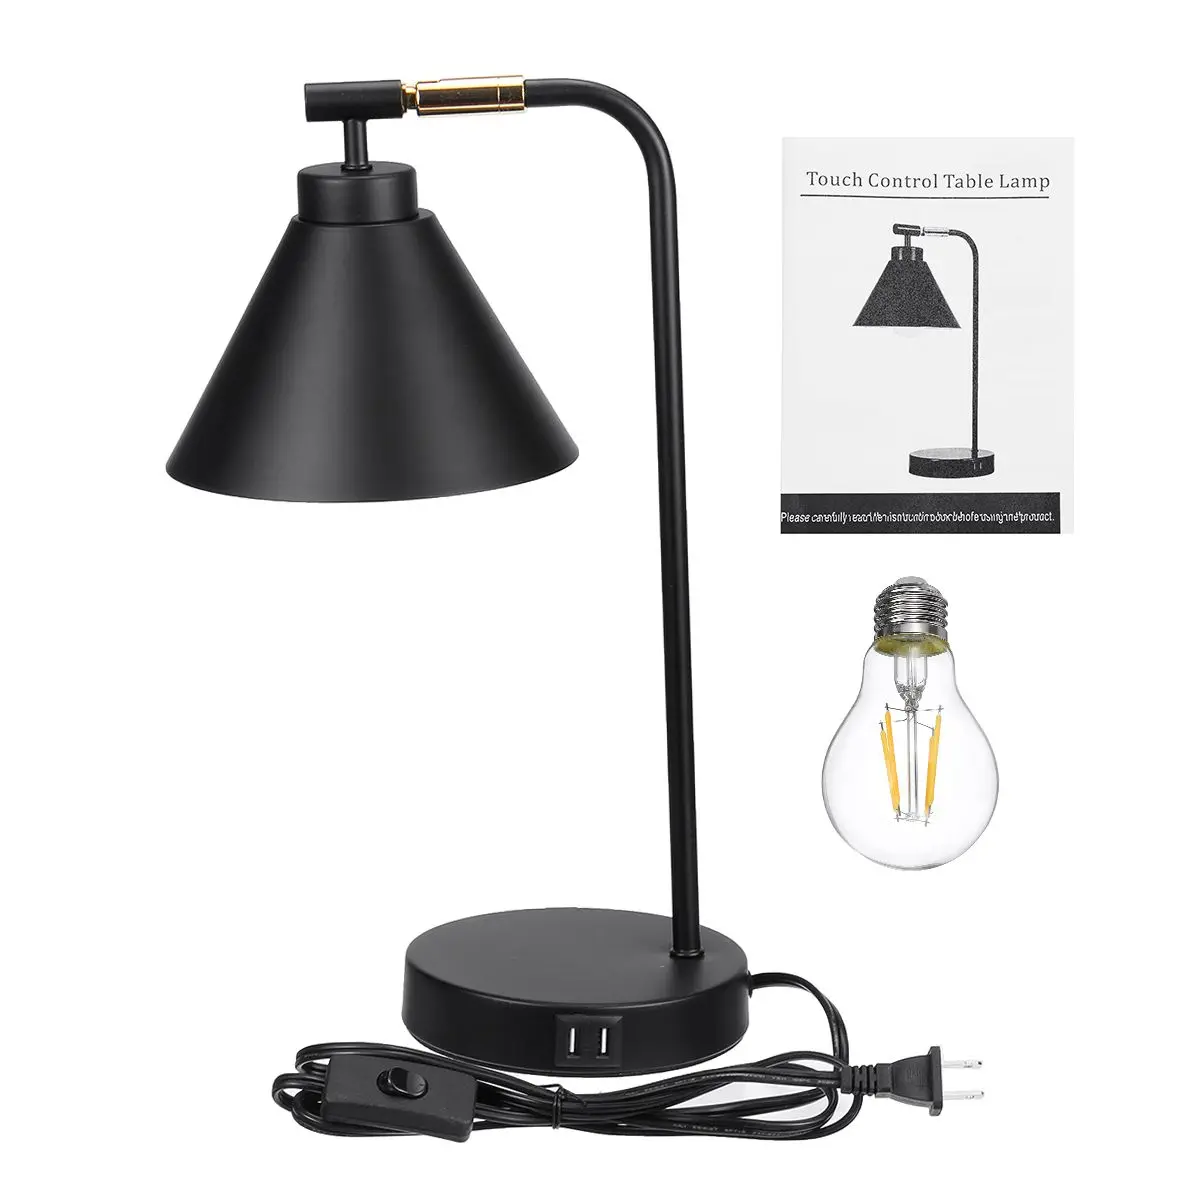 

Modern LED Long Swing Arm Adjustable Classic Desk Lamps E26 Dual USB Output Table Lamp For Bedside Study Office Reading AC110V